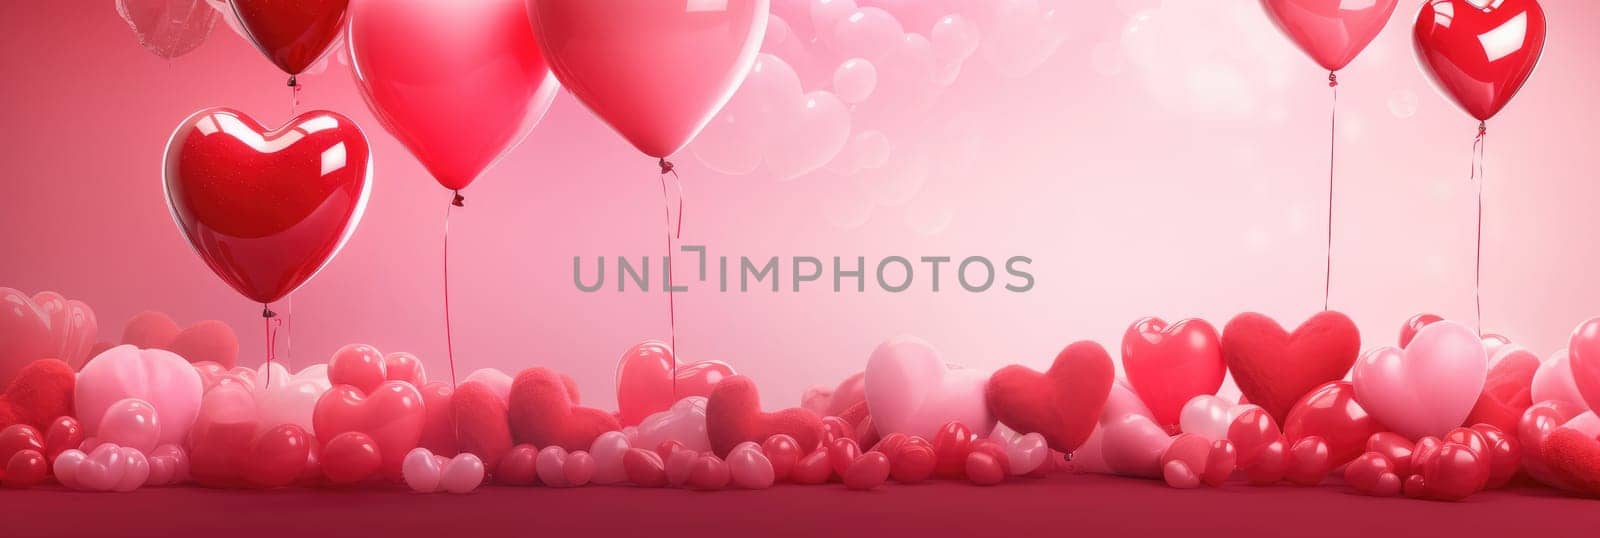 St. Valentines day, wedding banner with abstract illustrated red, pink flying hearts ballons on pink background. Use for cute love sale banners, vouchers or greeting cards. Concept love, copy space